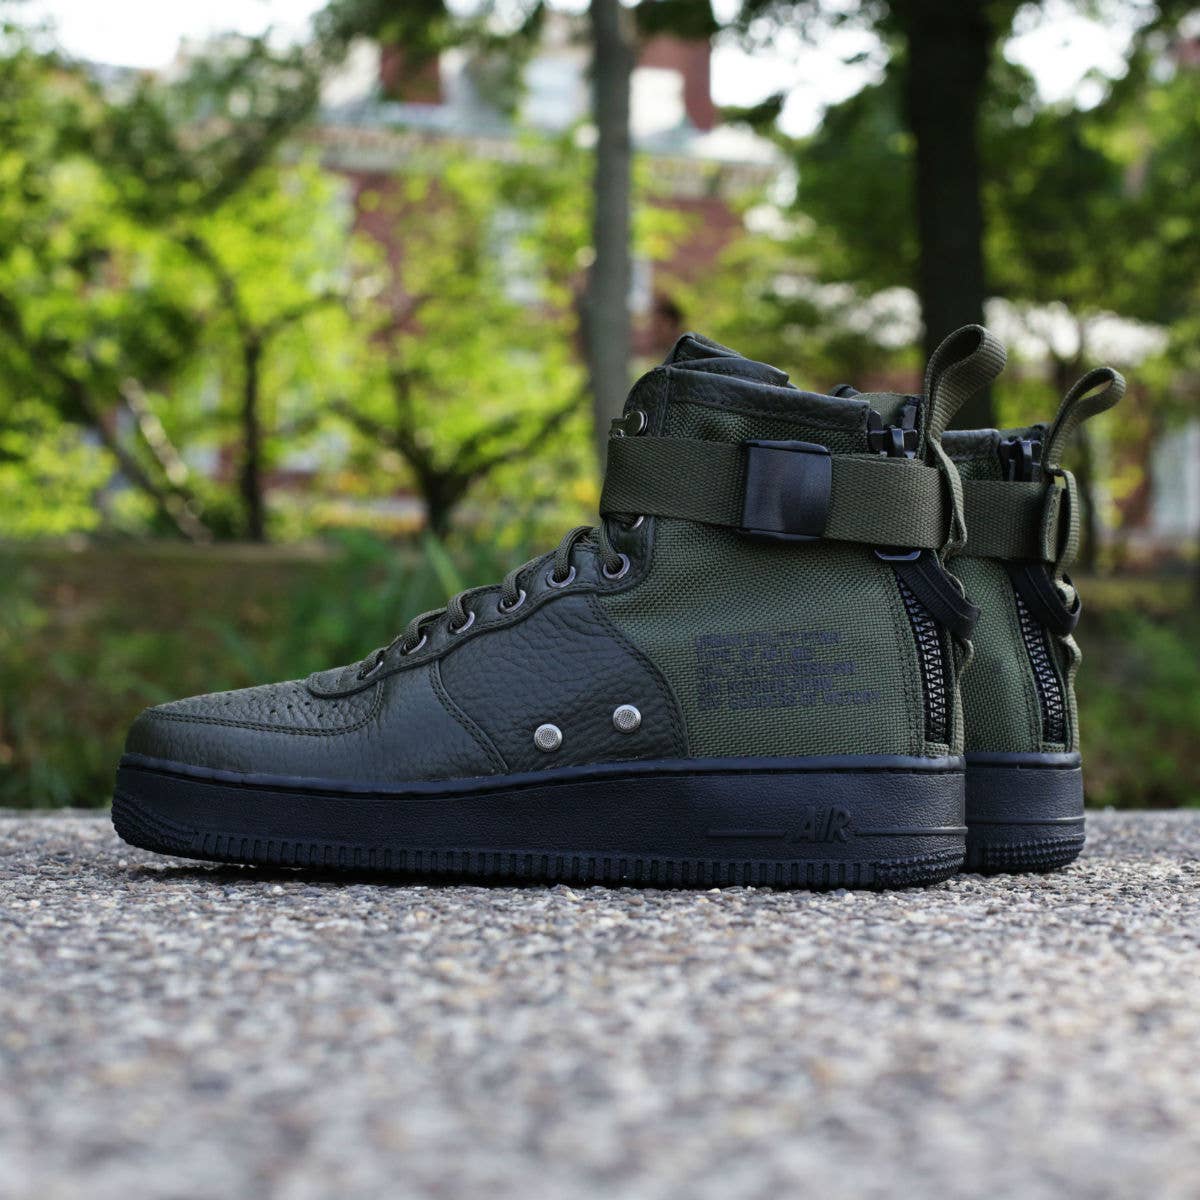 Expulsar a antepasado Comité Nike Delivers the SF Air Force 1 Mid in Military Green | Complex